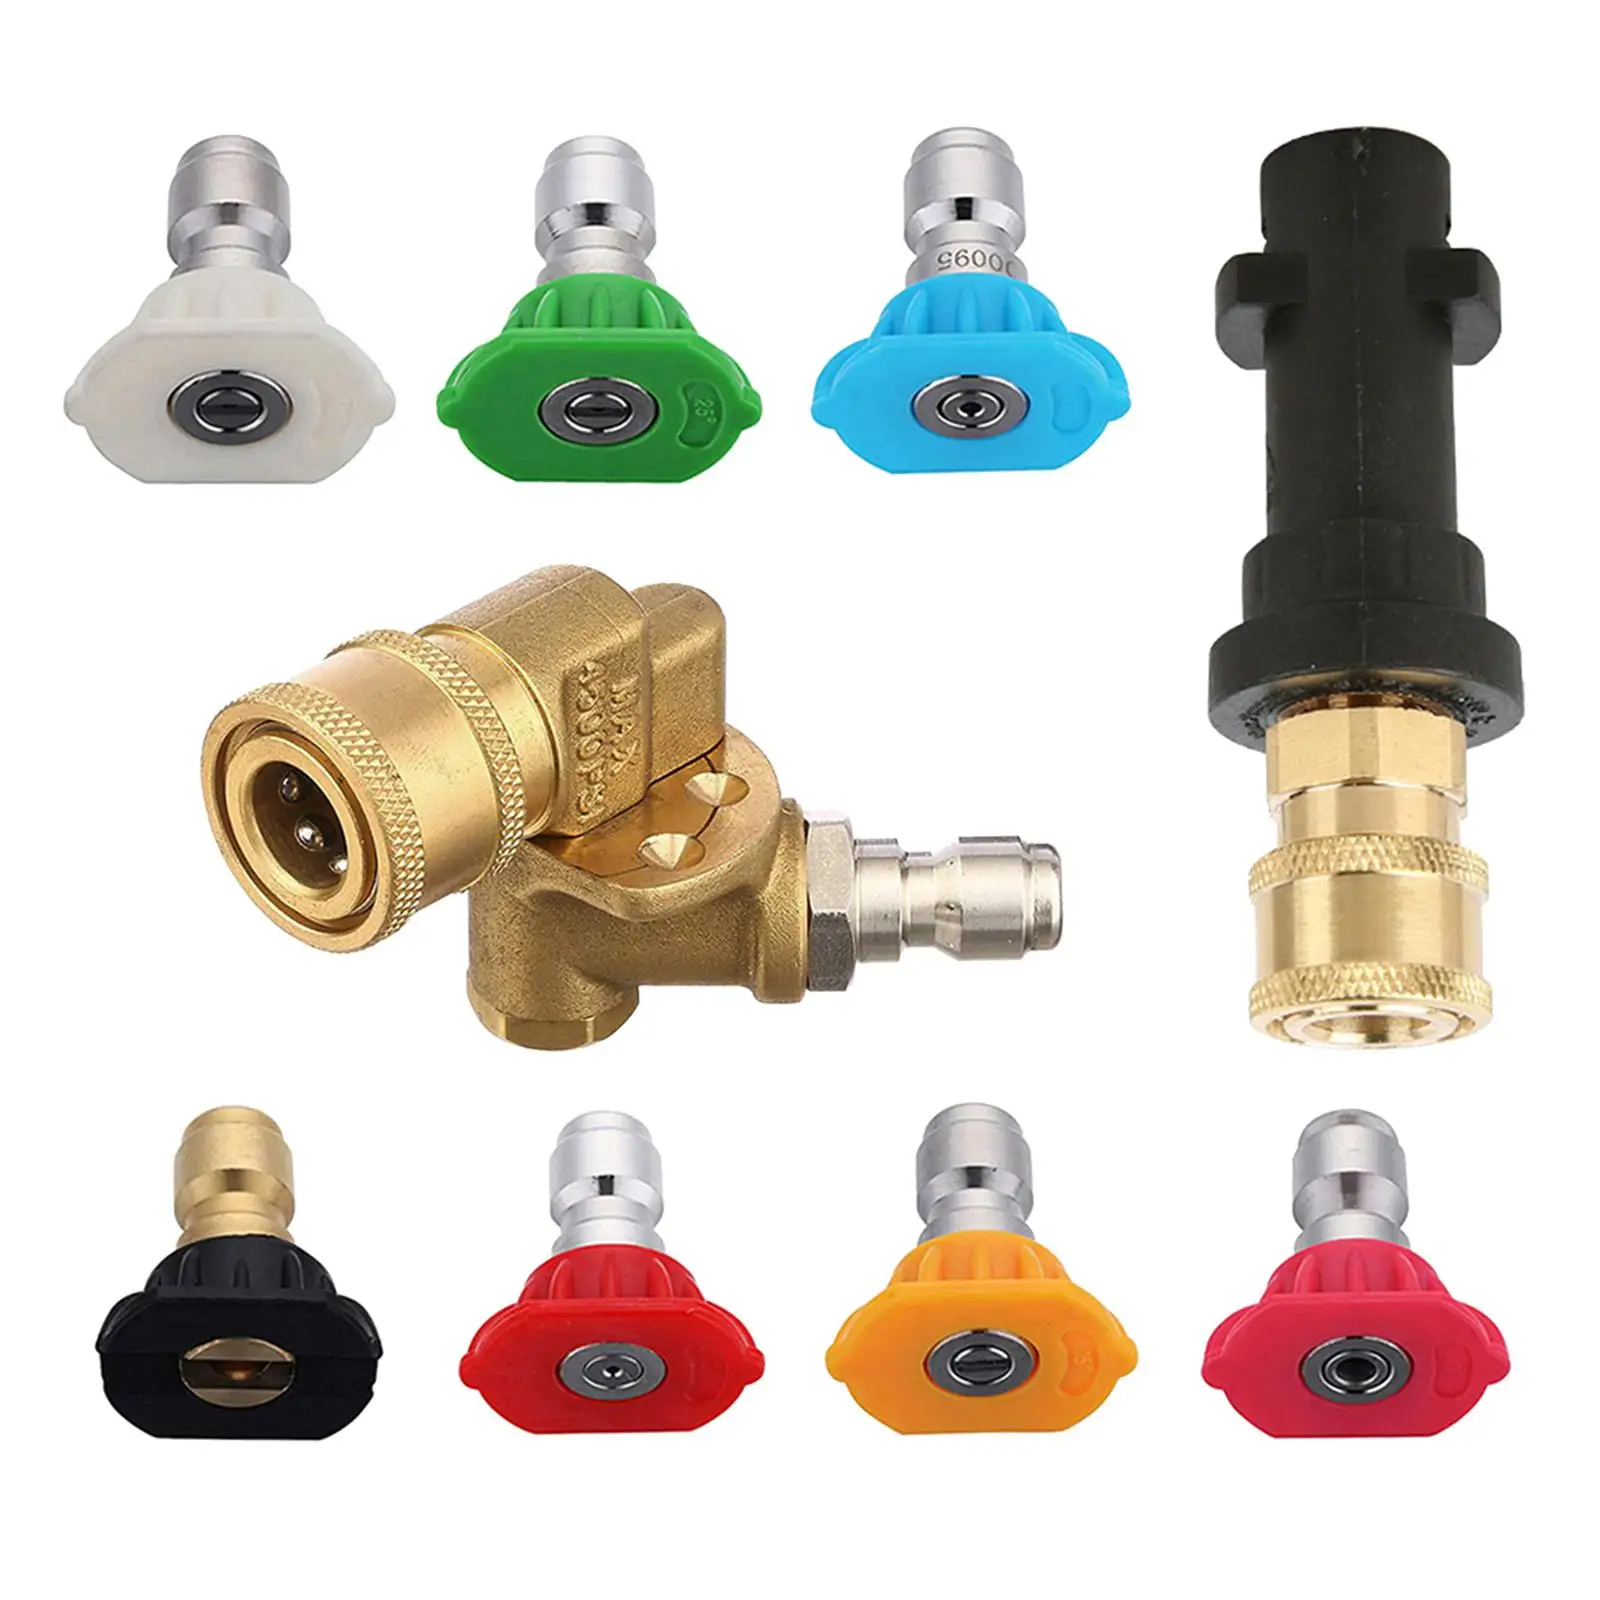 Adjustable Pressure Washer Adapter Set Nozzles 1/4inch Quick Connector for K2 K6 K4